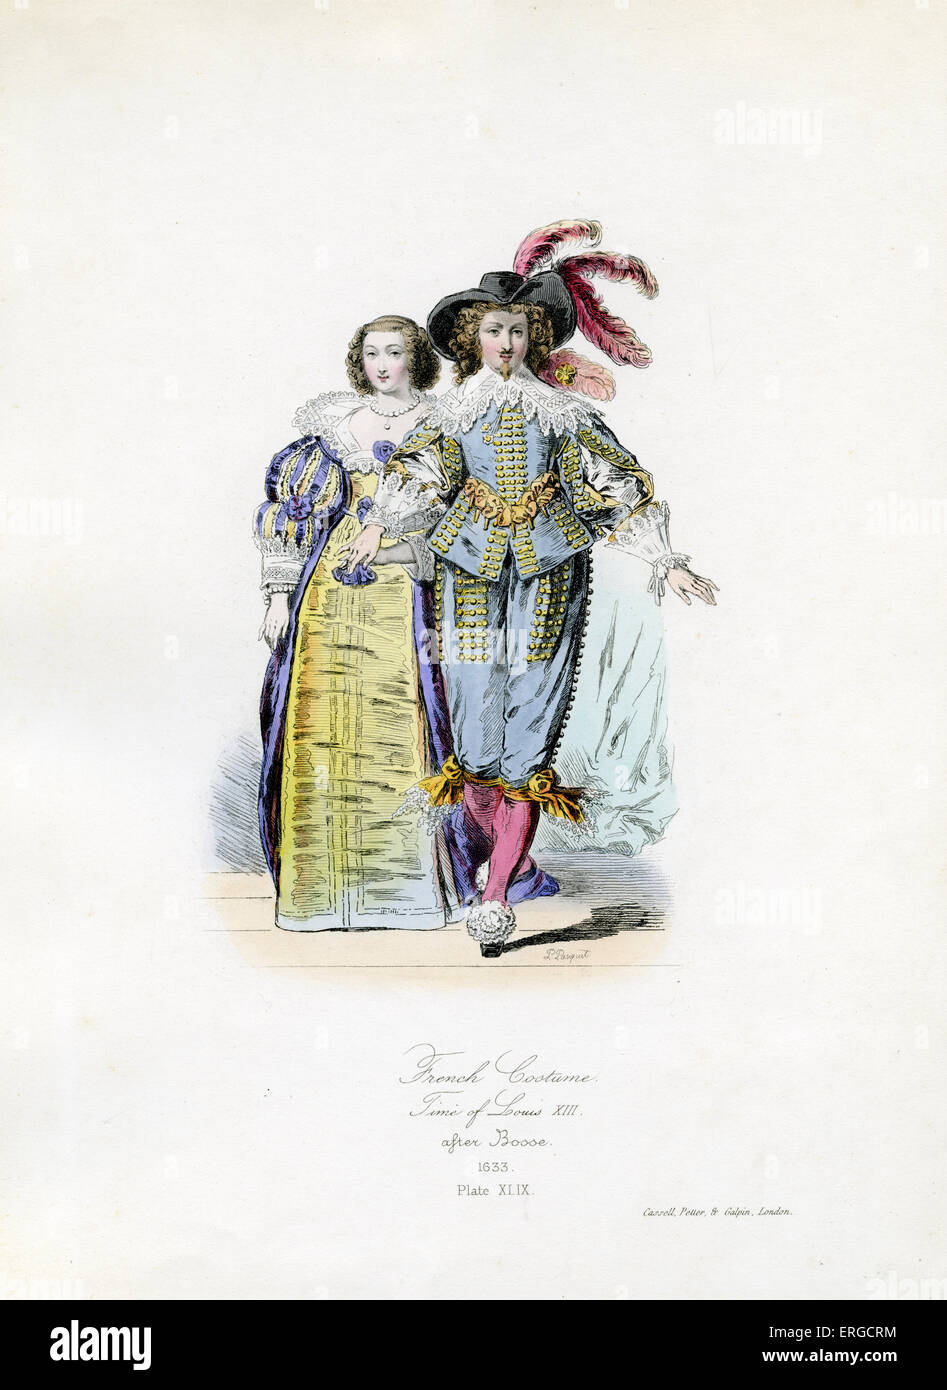 French costume from the time of Louis XIII. 1633 - from engraving by Polidor Pauquet after Bosse. LXIII, King of France: 27 Stock Photo